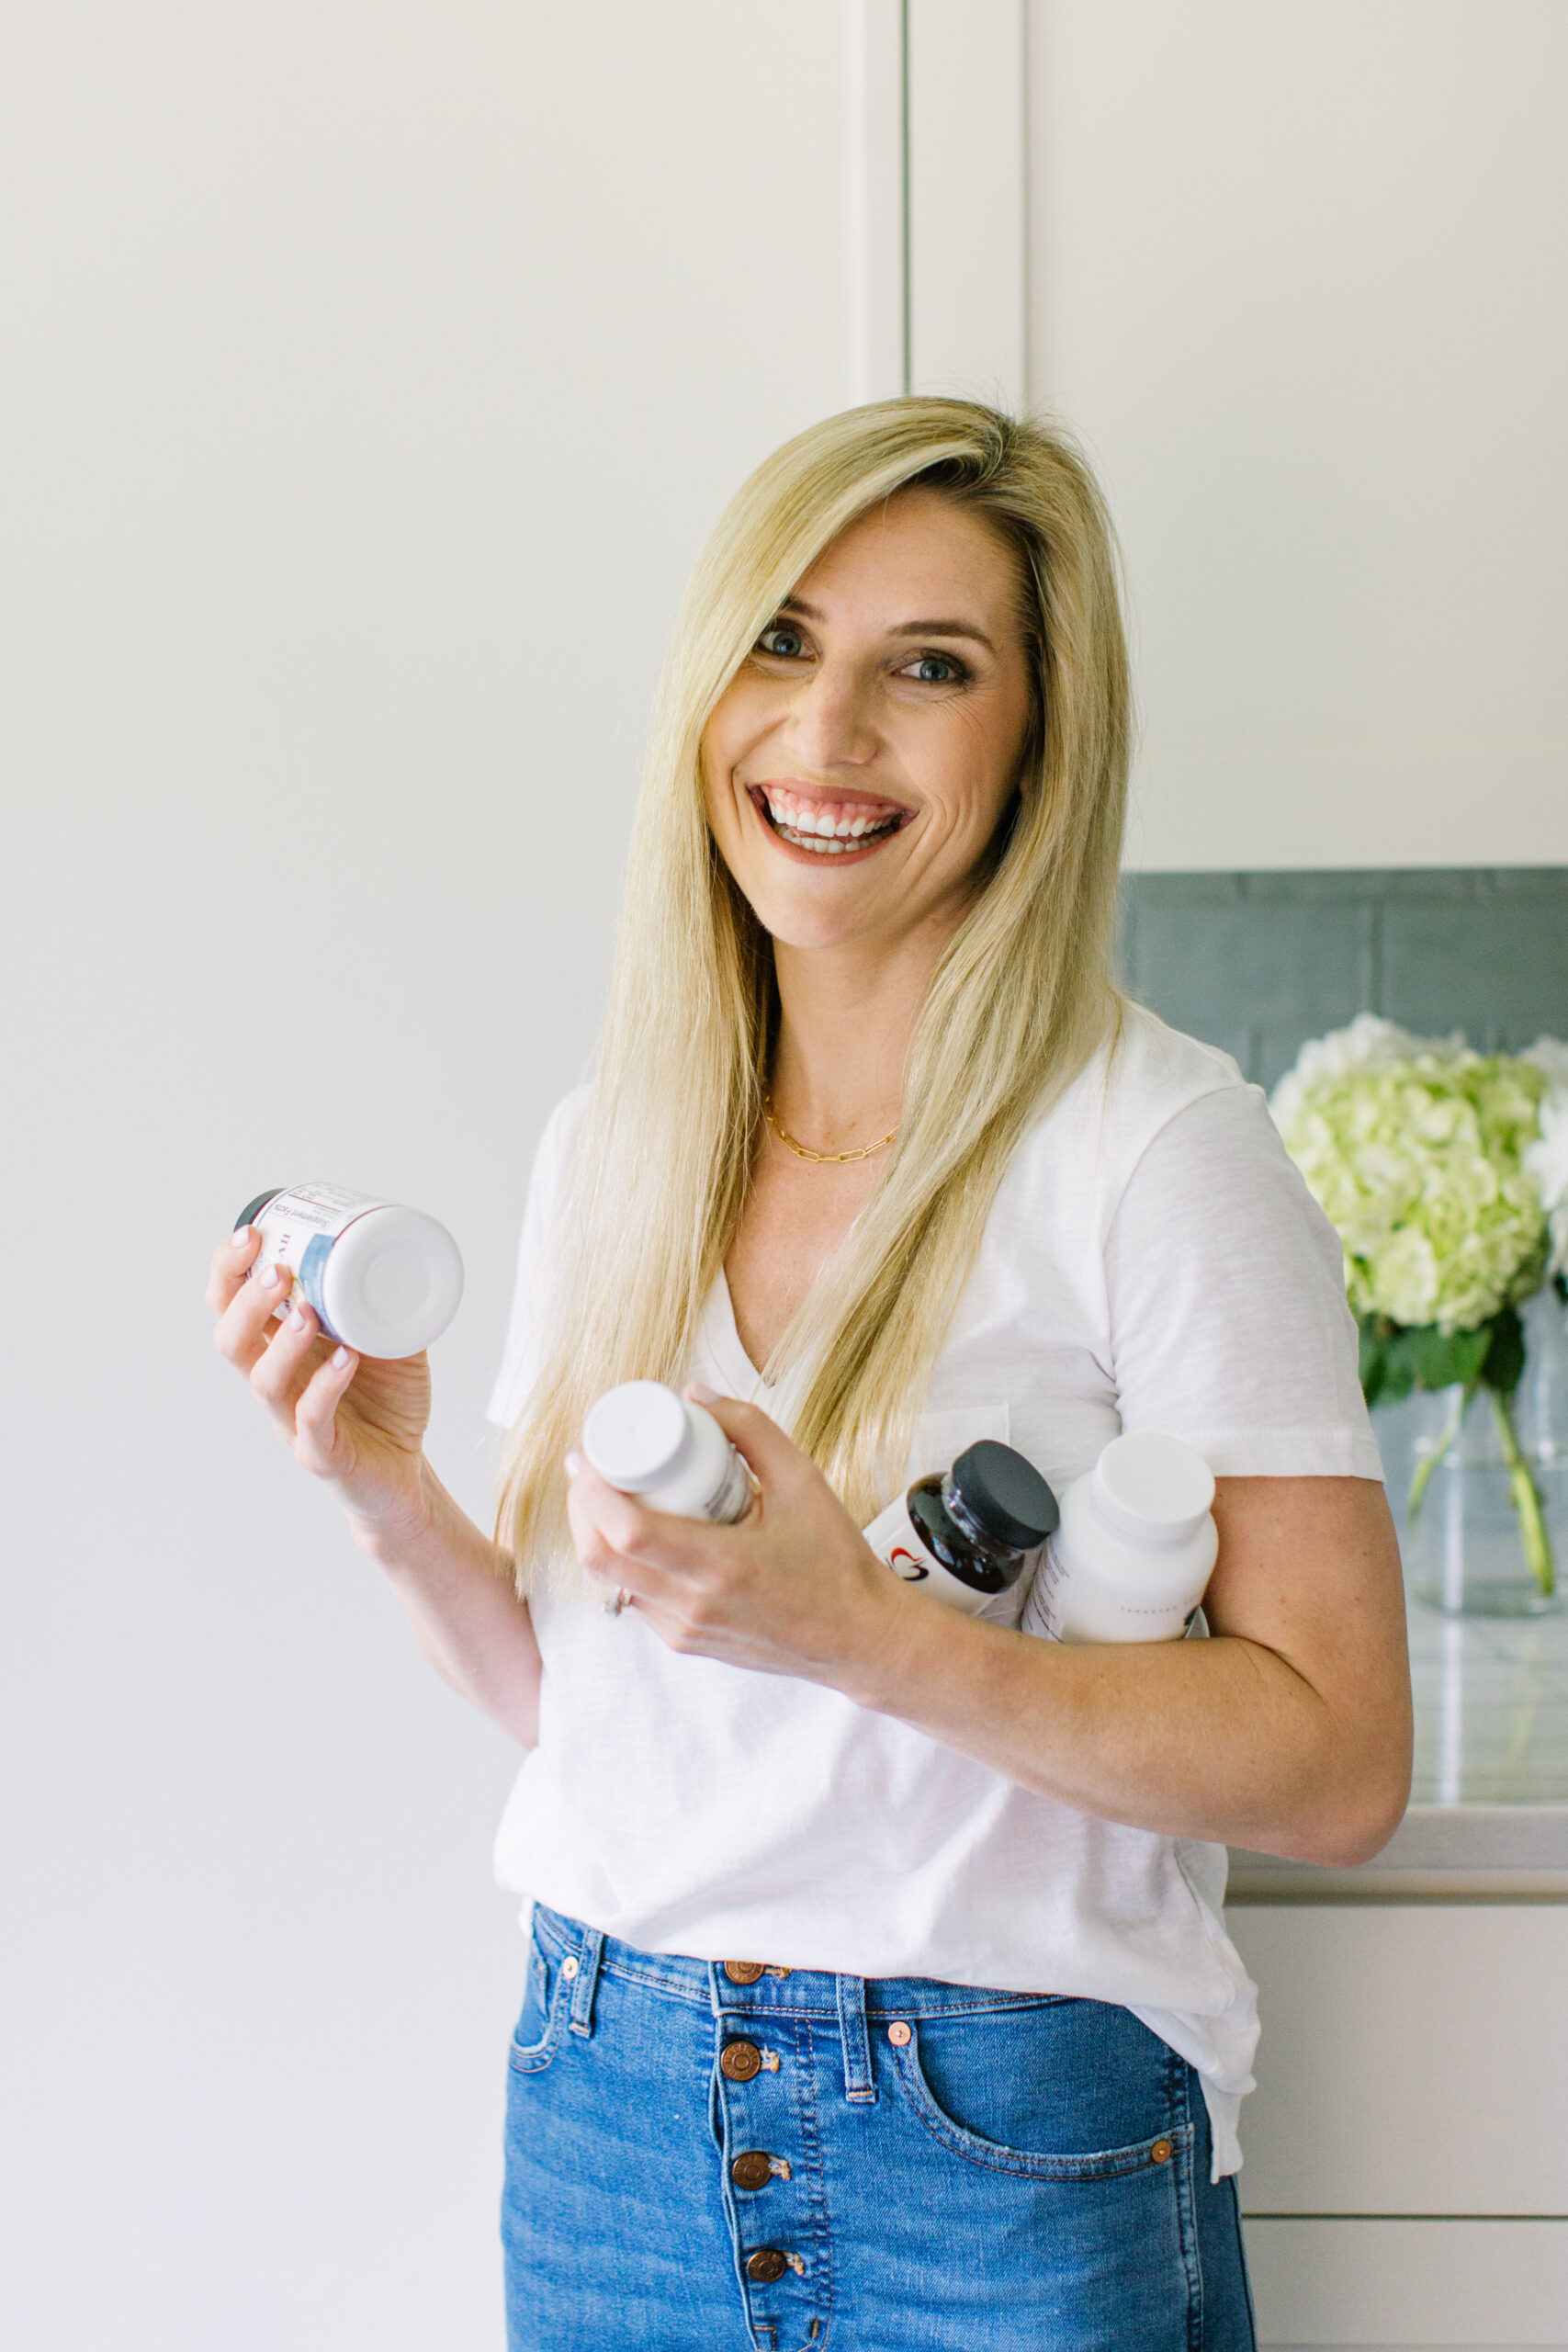 Taylor Dukes (white blonde woman wearing a white t-shirt and jeans) holding supplements